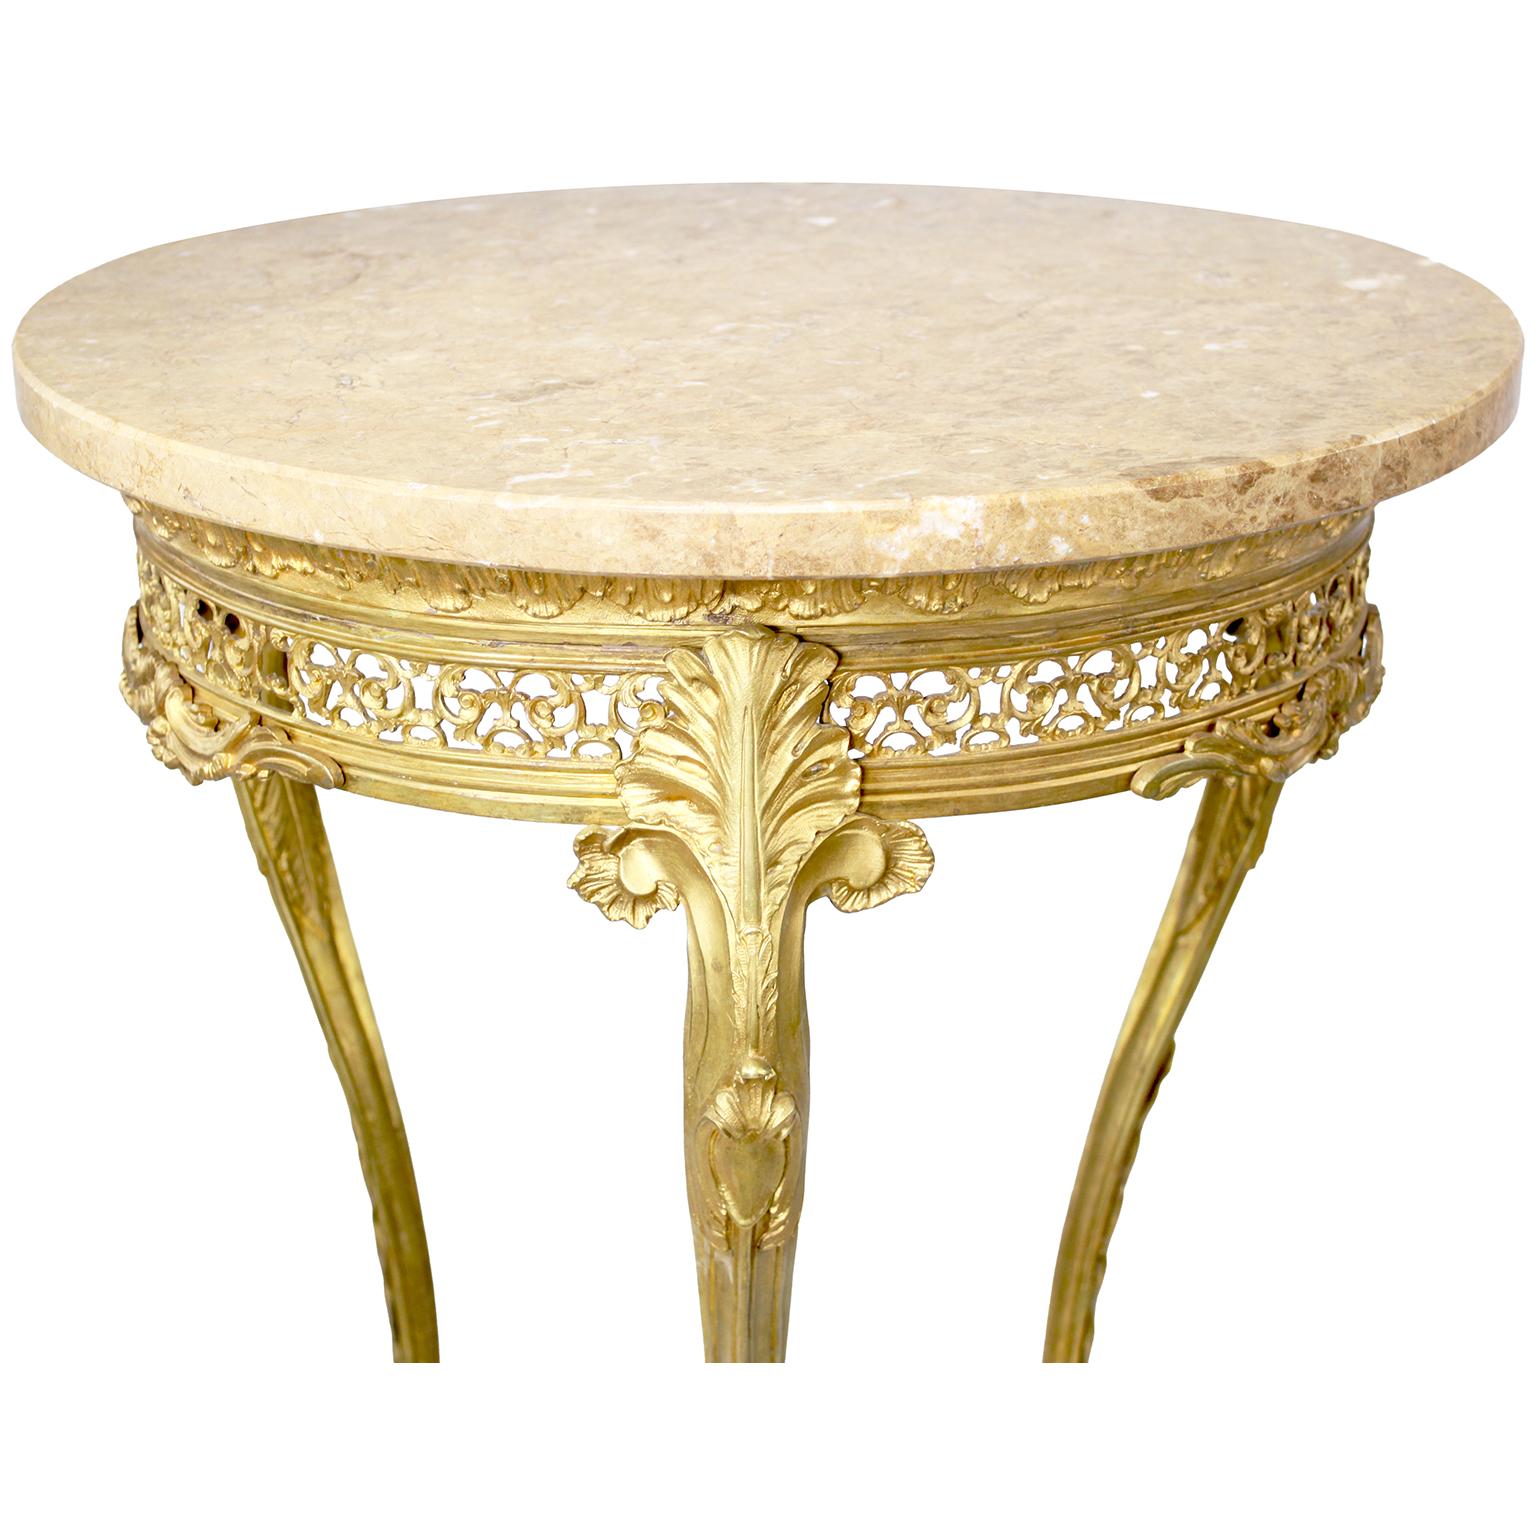 Early 20th Century A French Belle Époque Louis XV Style Gilt-Bronze Gueridon Table with Marble Top For Sale